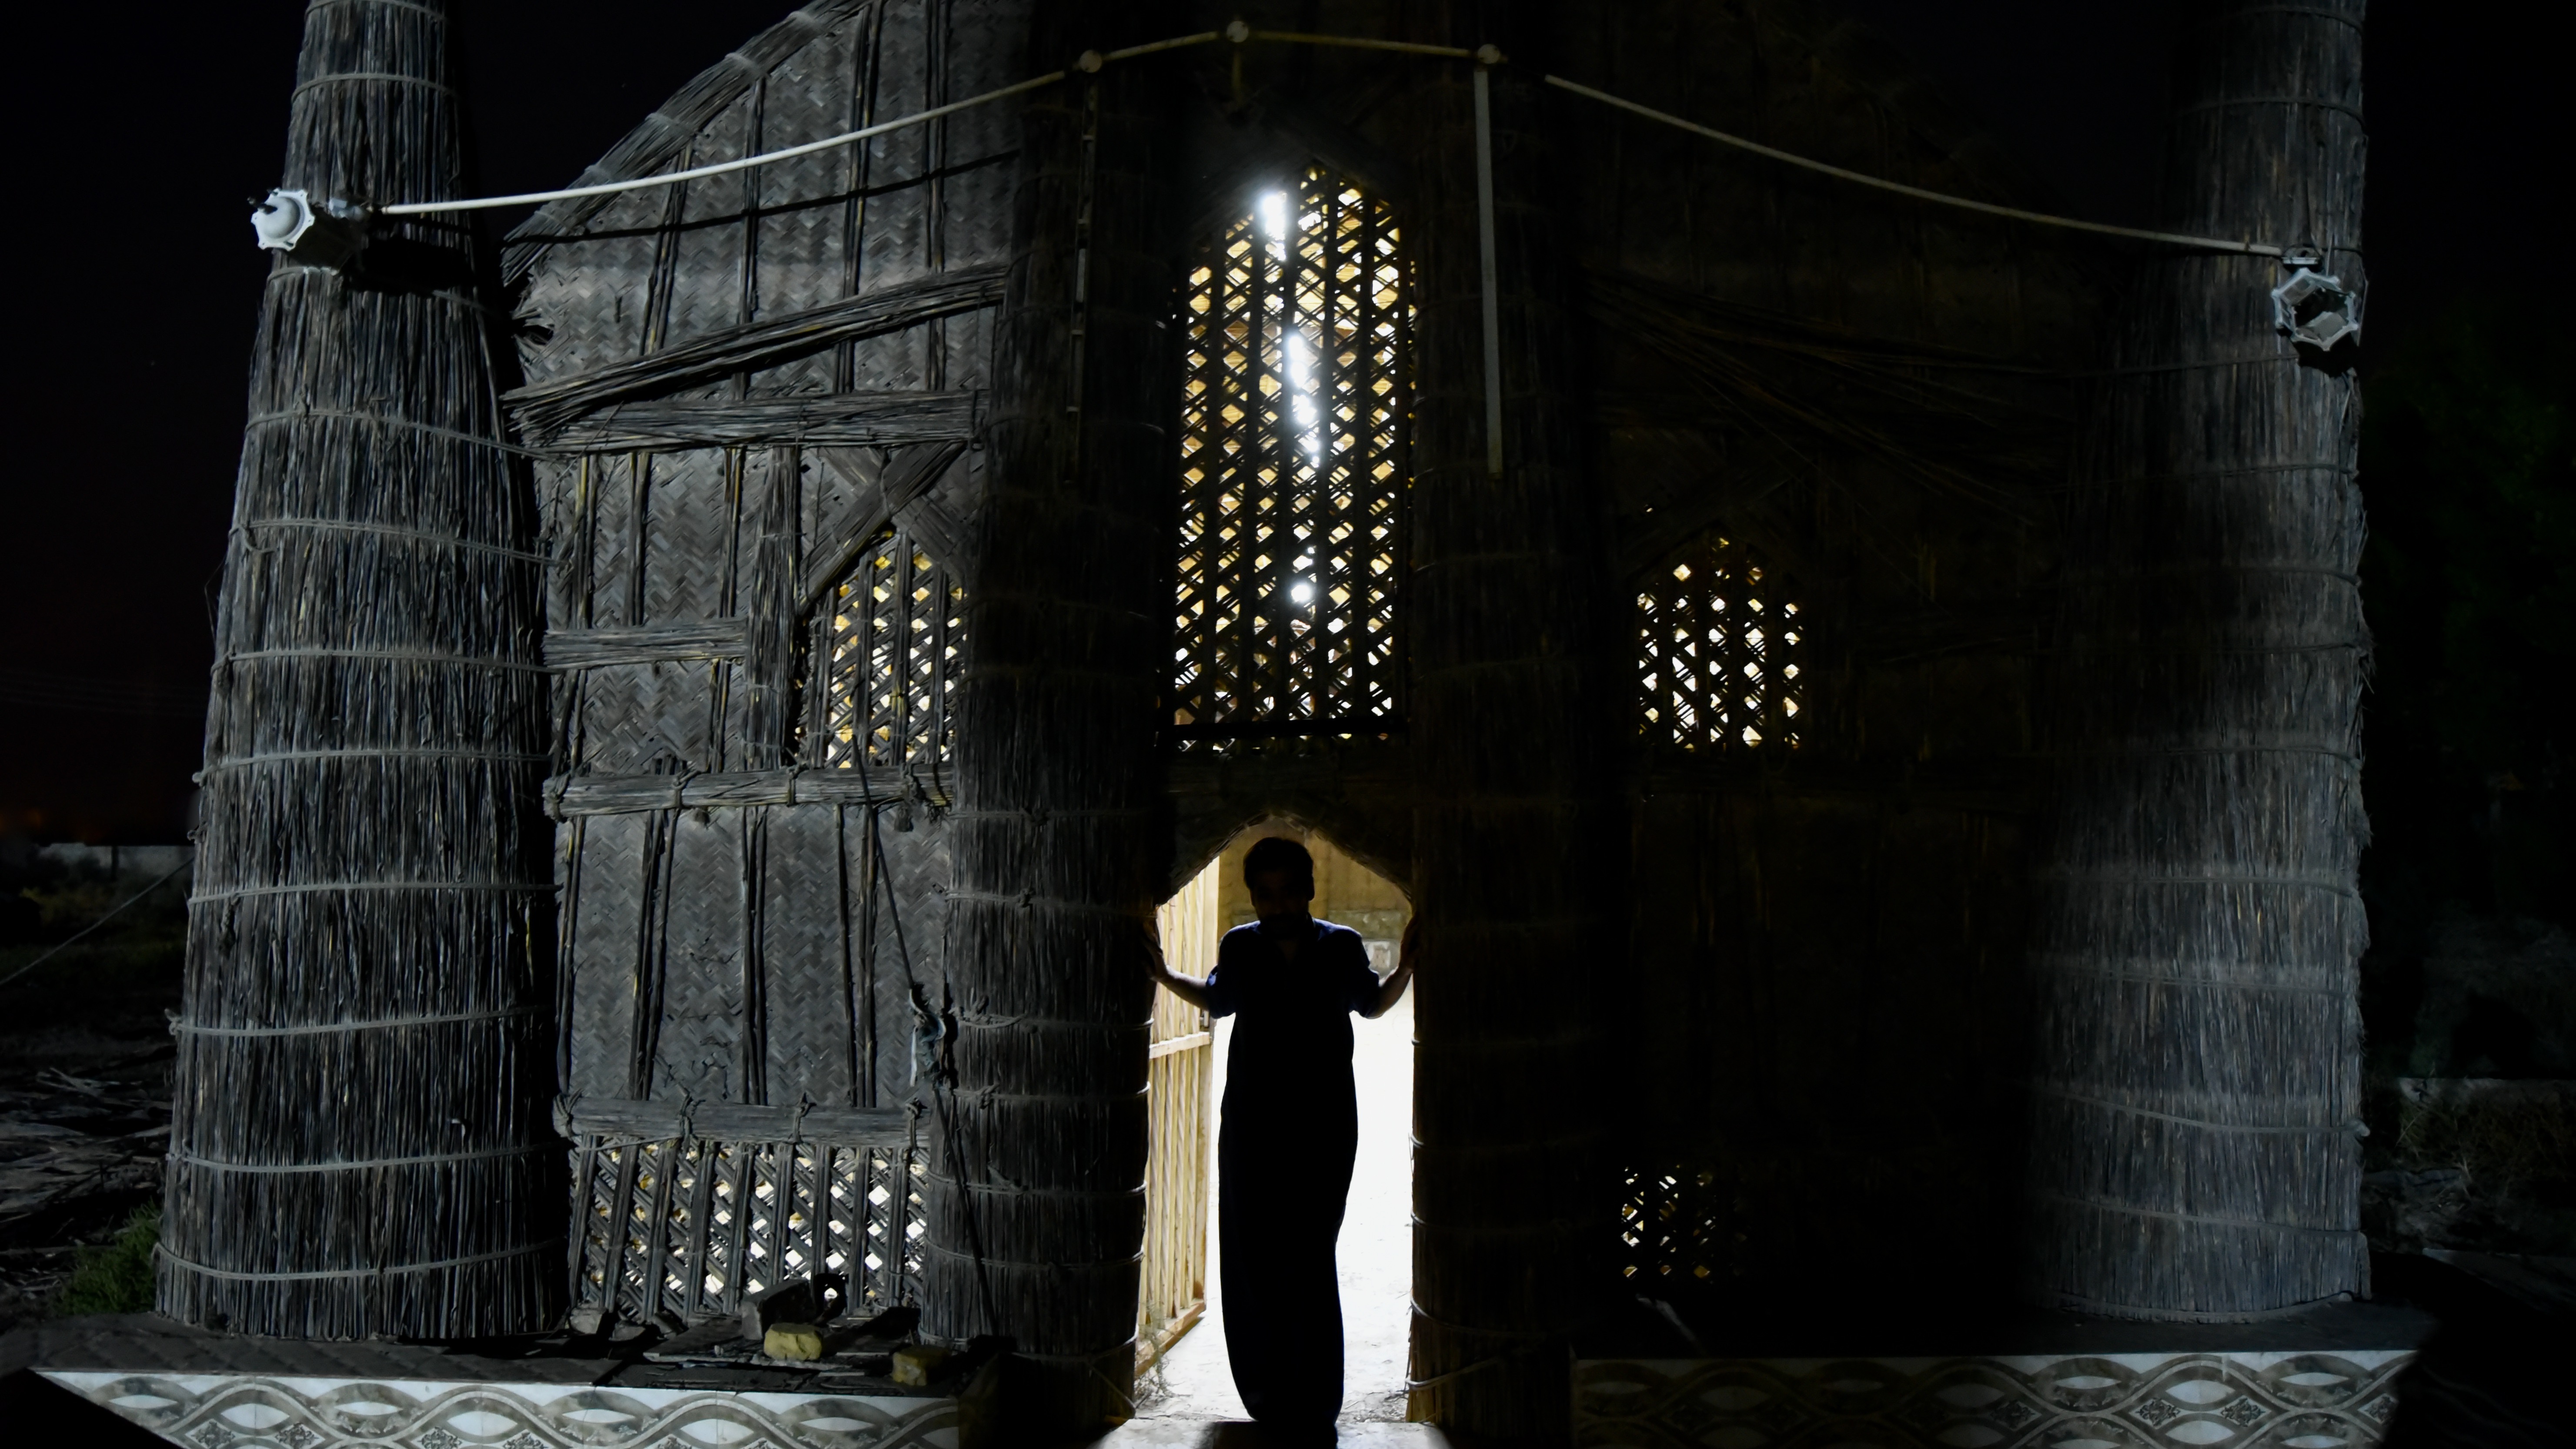 A figure silhouetted in the doorway of a traditional Marsh Arab mudhif